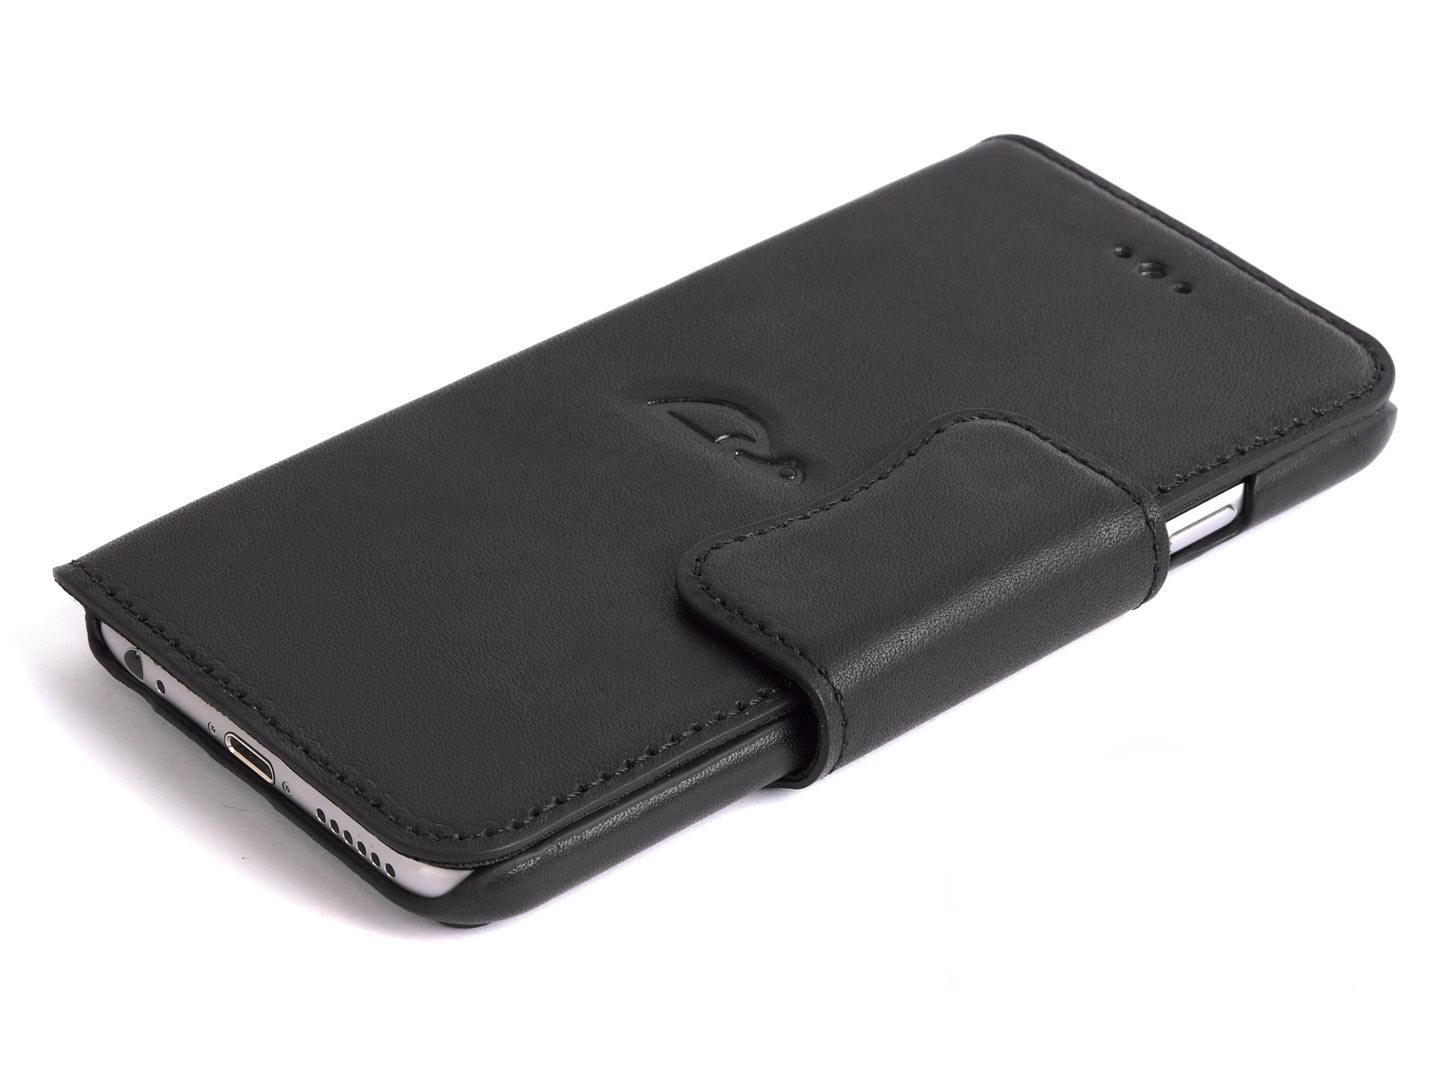 Black iPhone 6 leather case - Carapaz